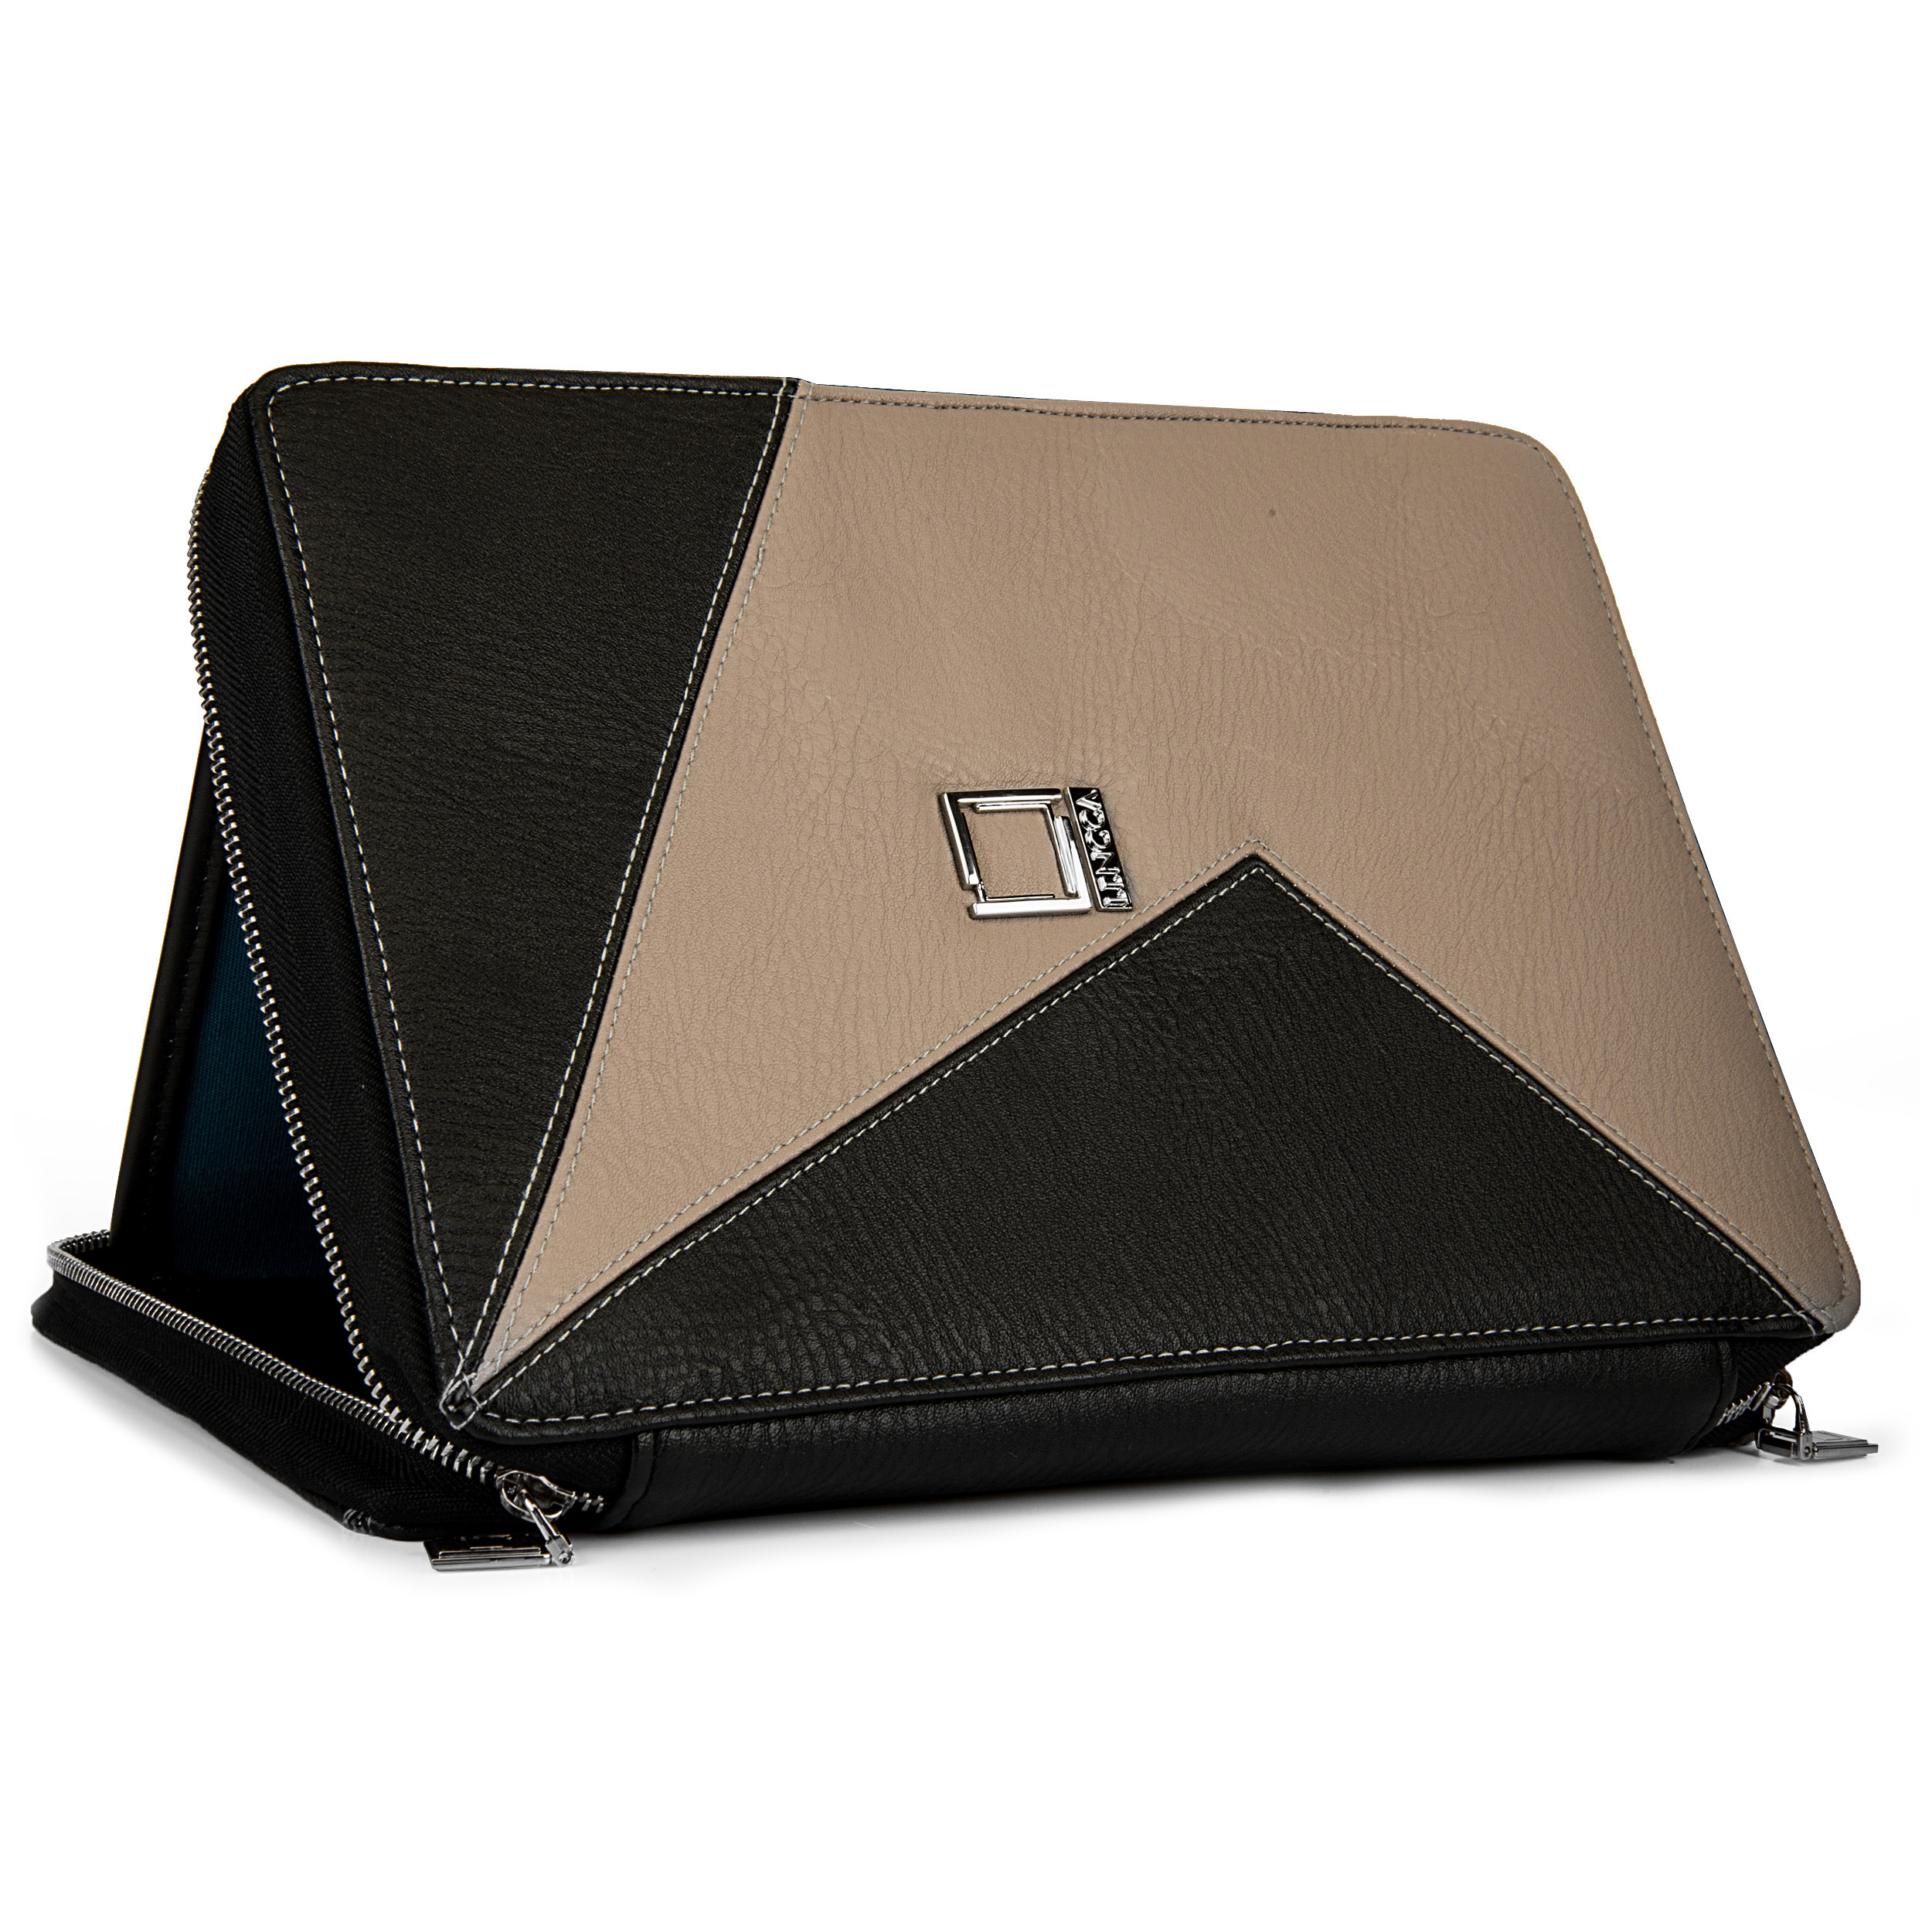 Lencca Minky Leather Tablet Portfolio Suitable for Asus Transformer Book T90 Chi 8.9-inch